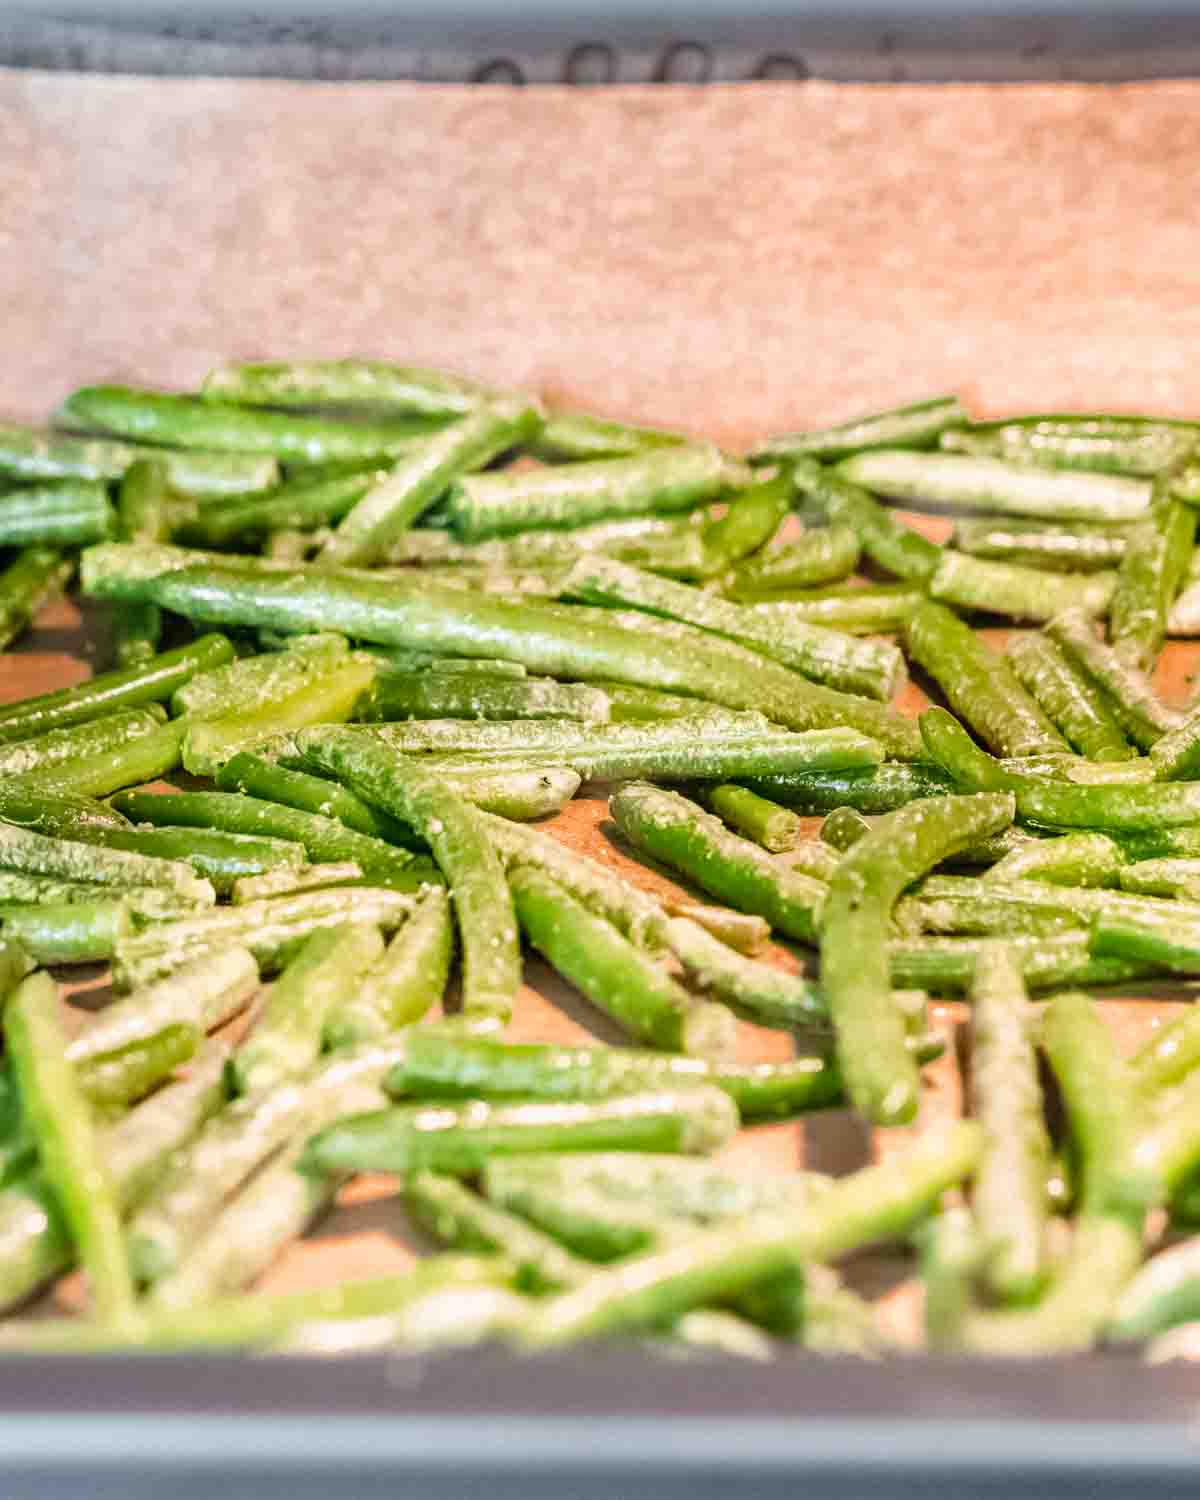 frozen green beans in the oven.